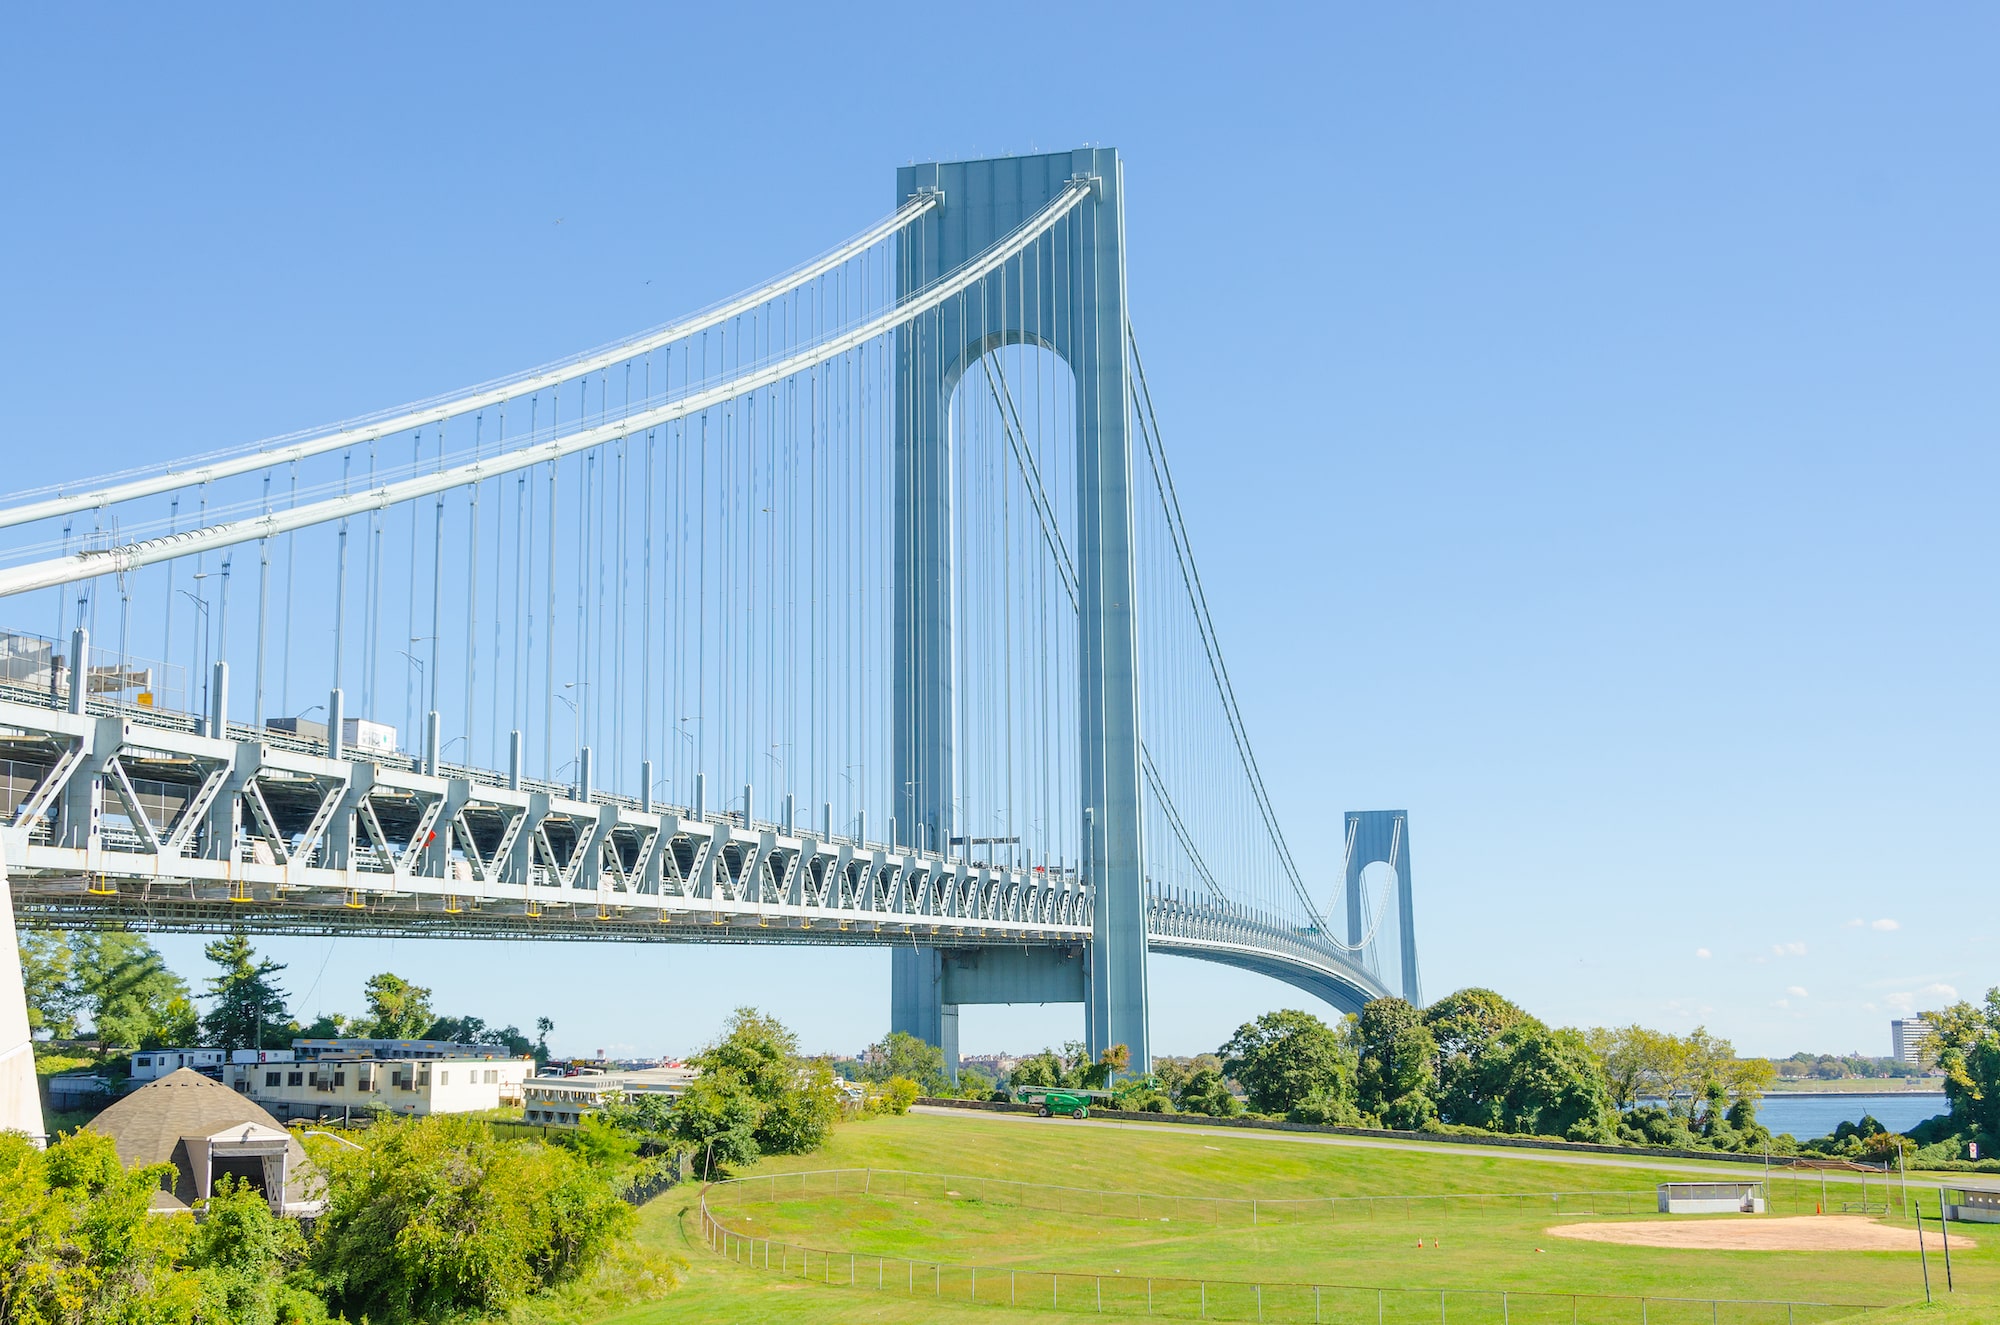 Beautiful Verrazano Narrows Bridge in New York painted a light blue color with homes and green grass below.